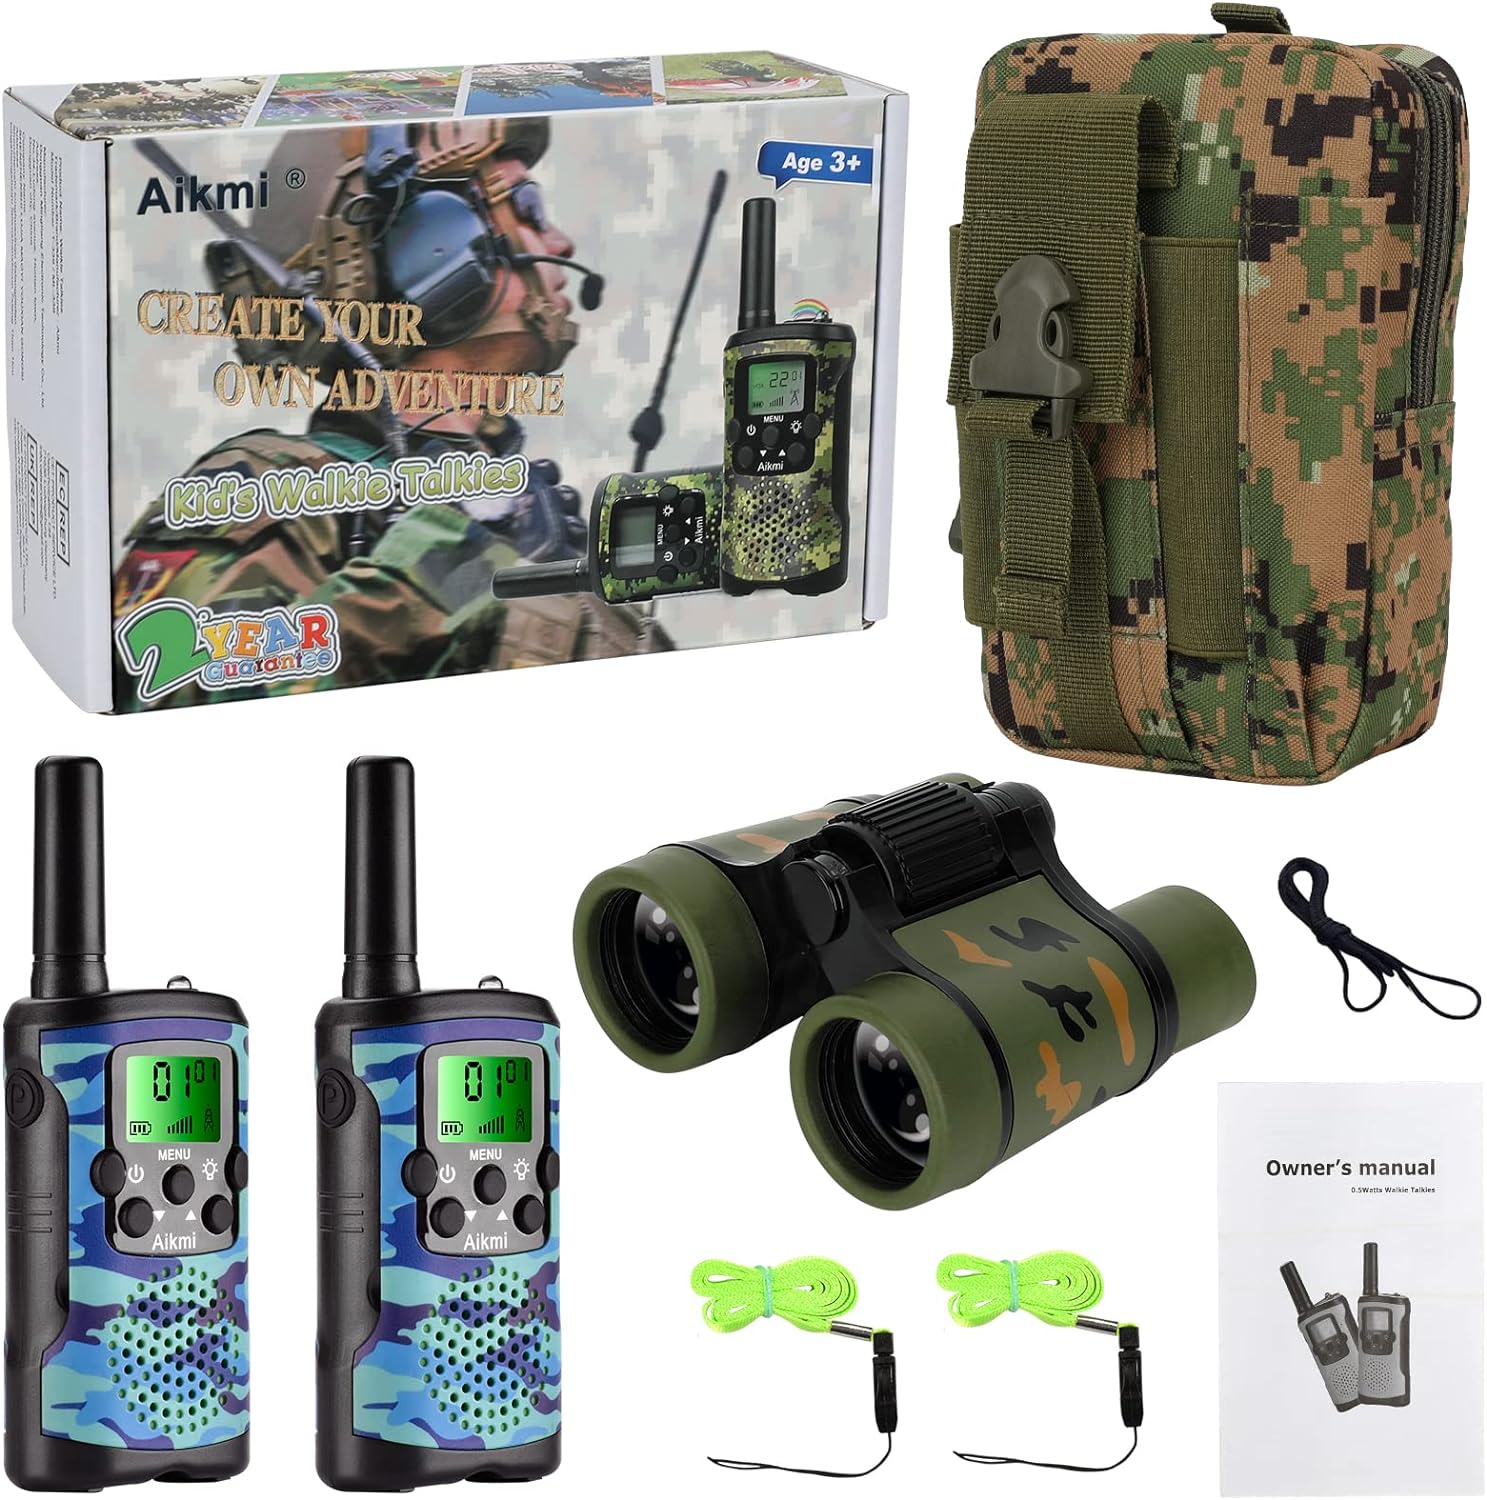 Read more about the article Walkie Talkies for Kids Toys Boys Aged 5+ Outdoor 2 Way Radio 22 Channel 3 Miles Range Camp Hunt Adventure Game Birthday 6 7 8 9 10 Year Old Gifts (Green) Review